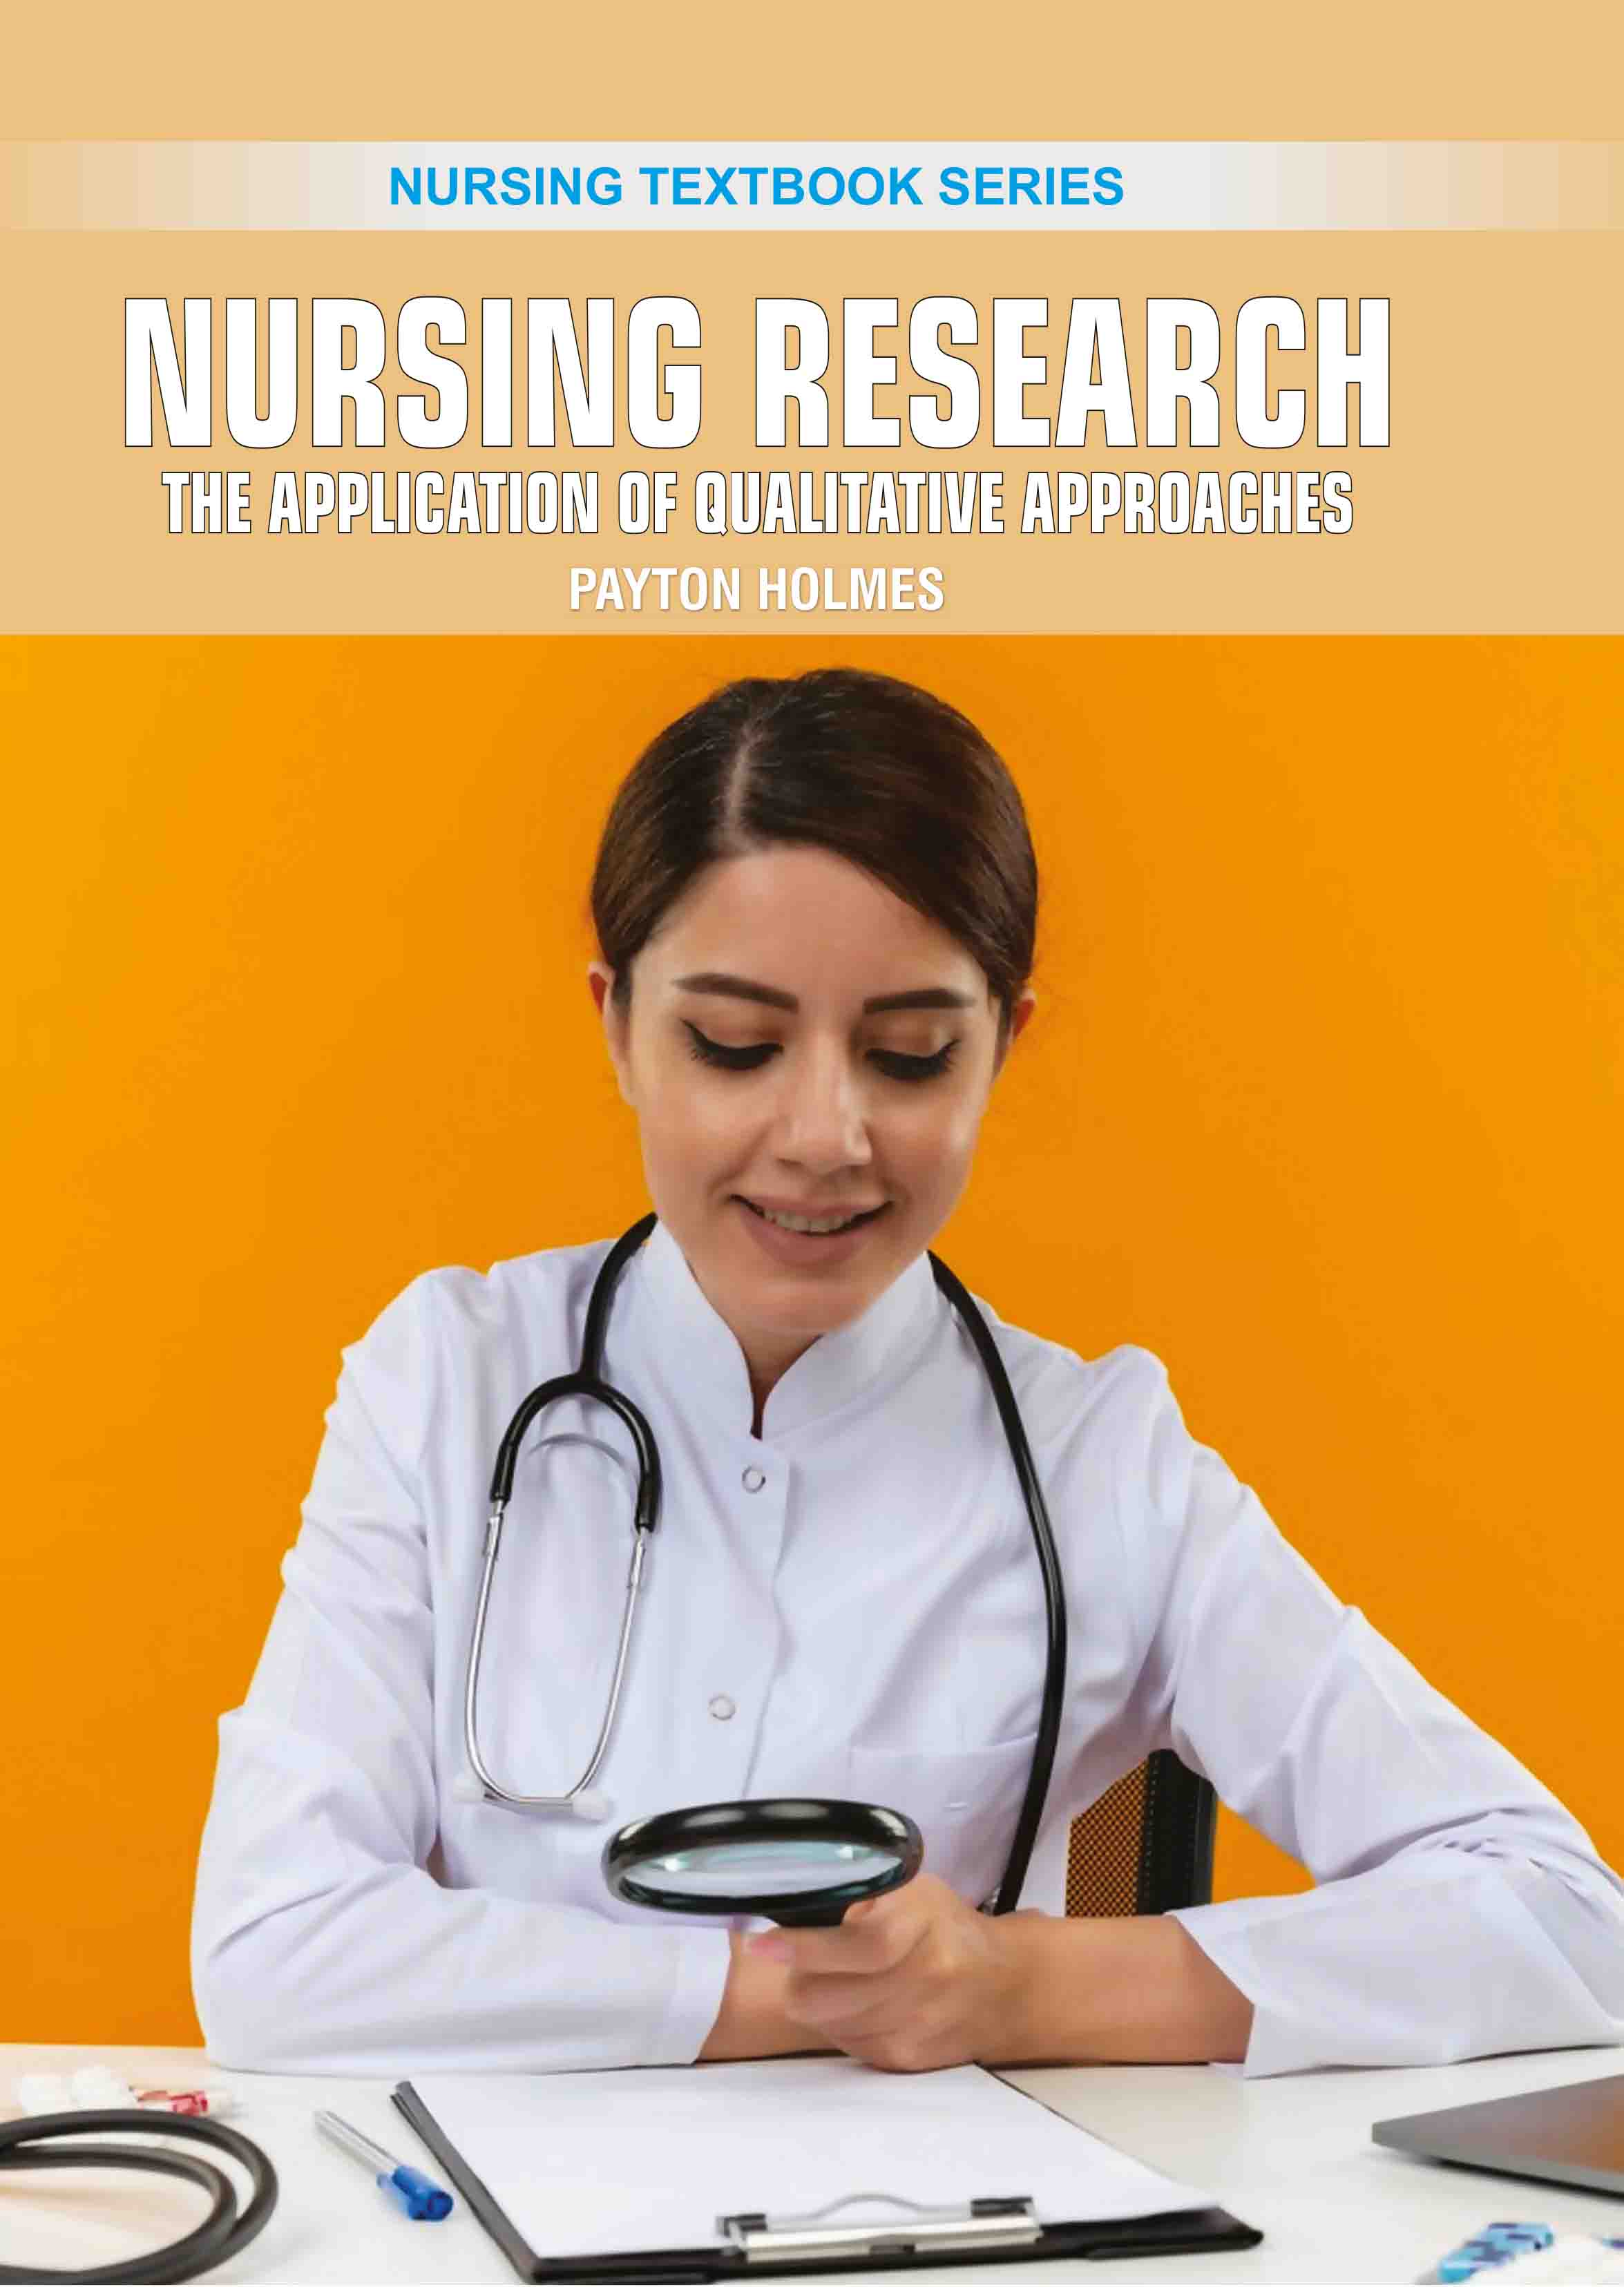 Nursing Research: The Application of Qualitative Approaches  